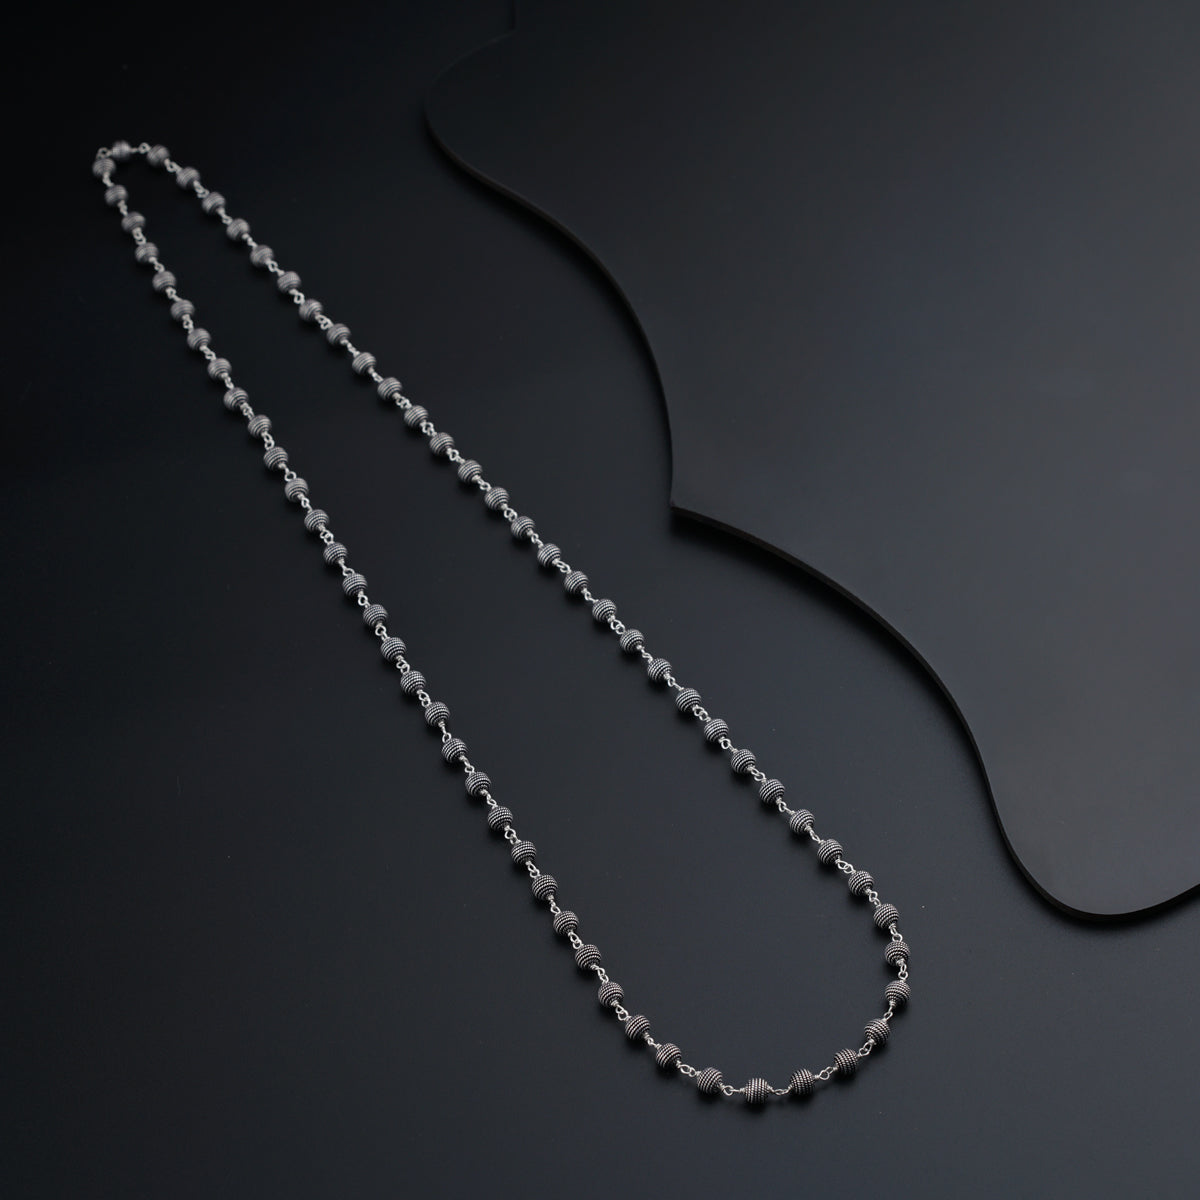 a silver chain on a black surface